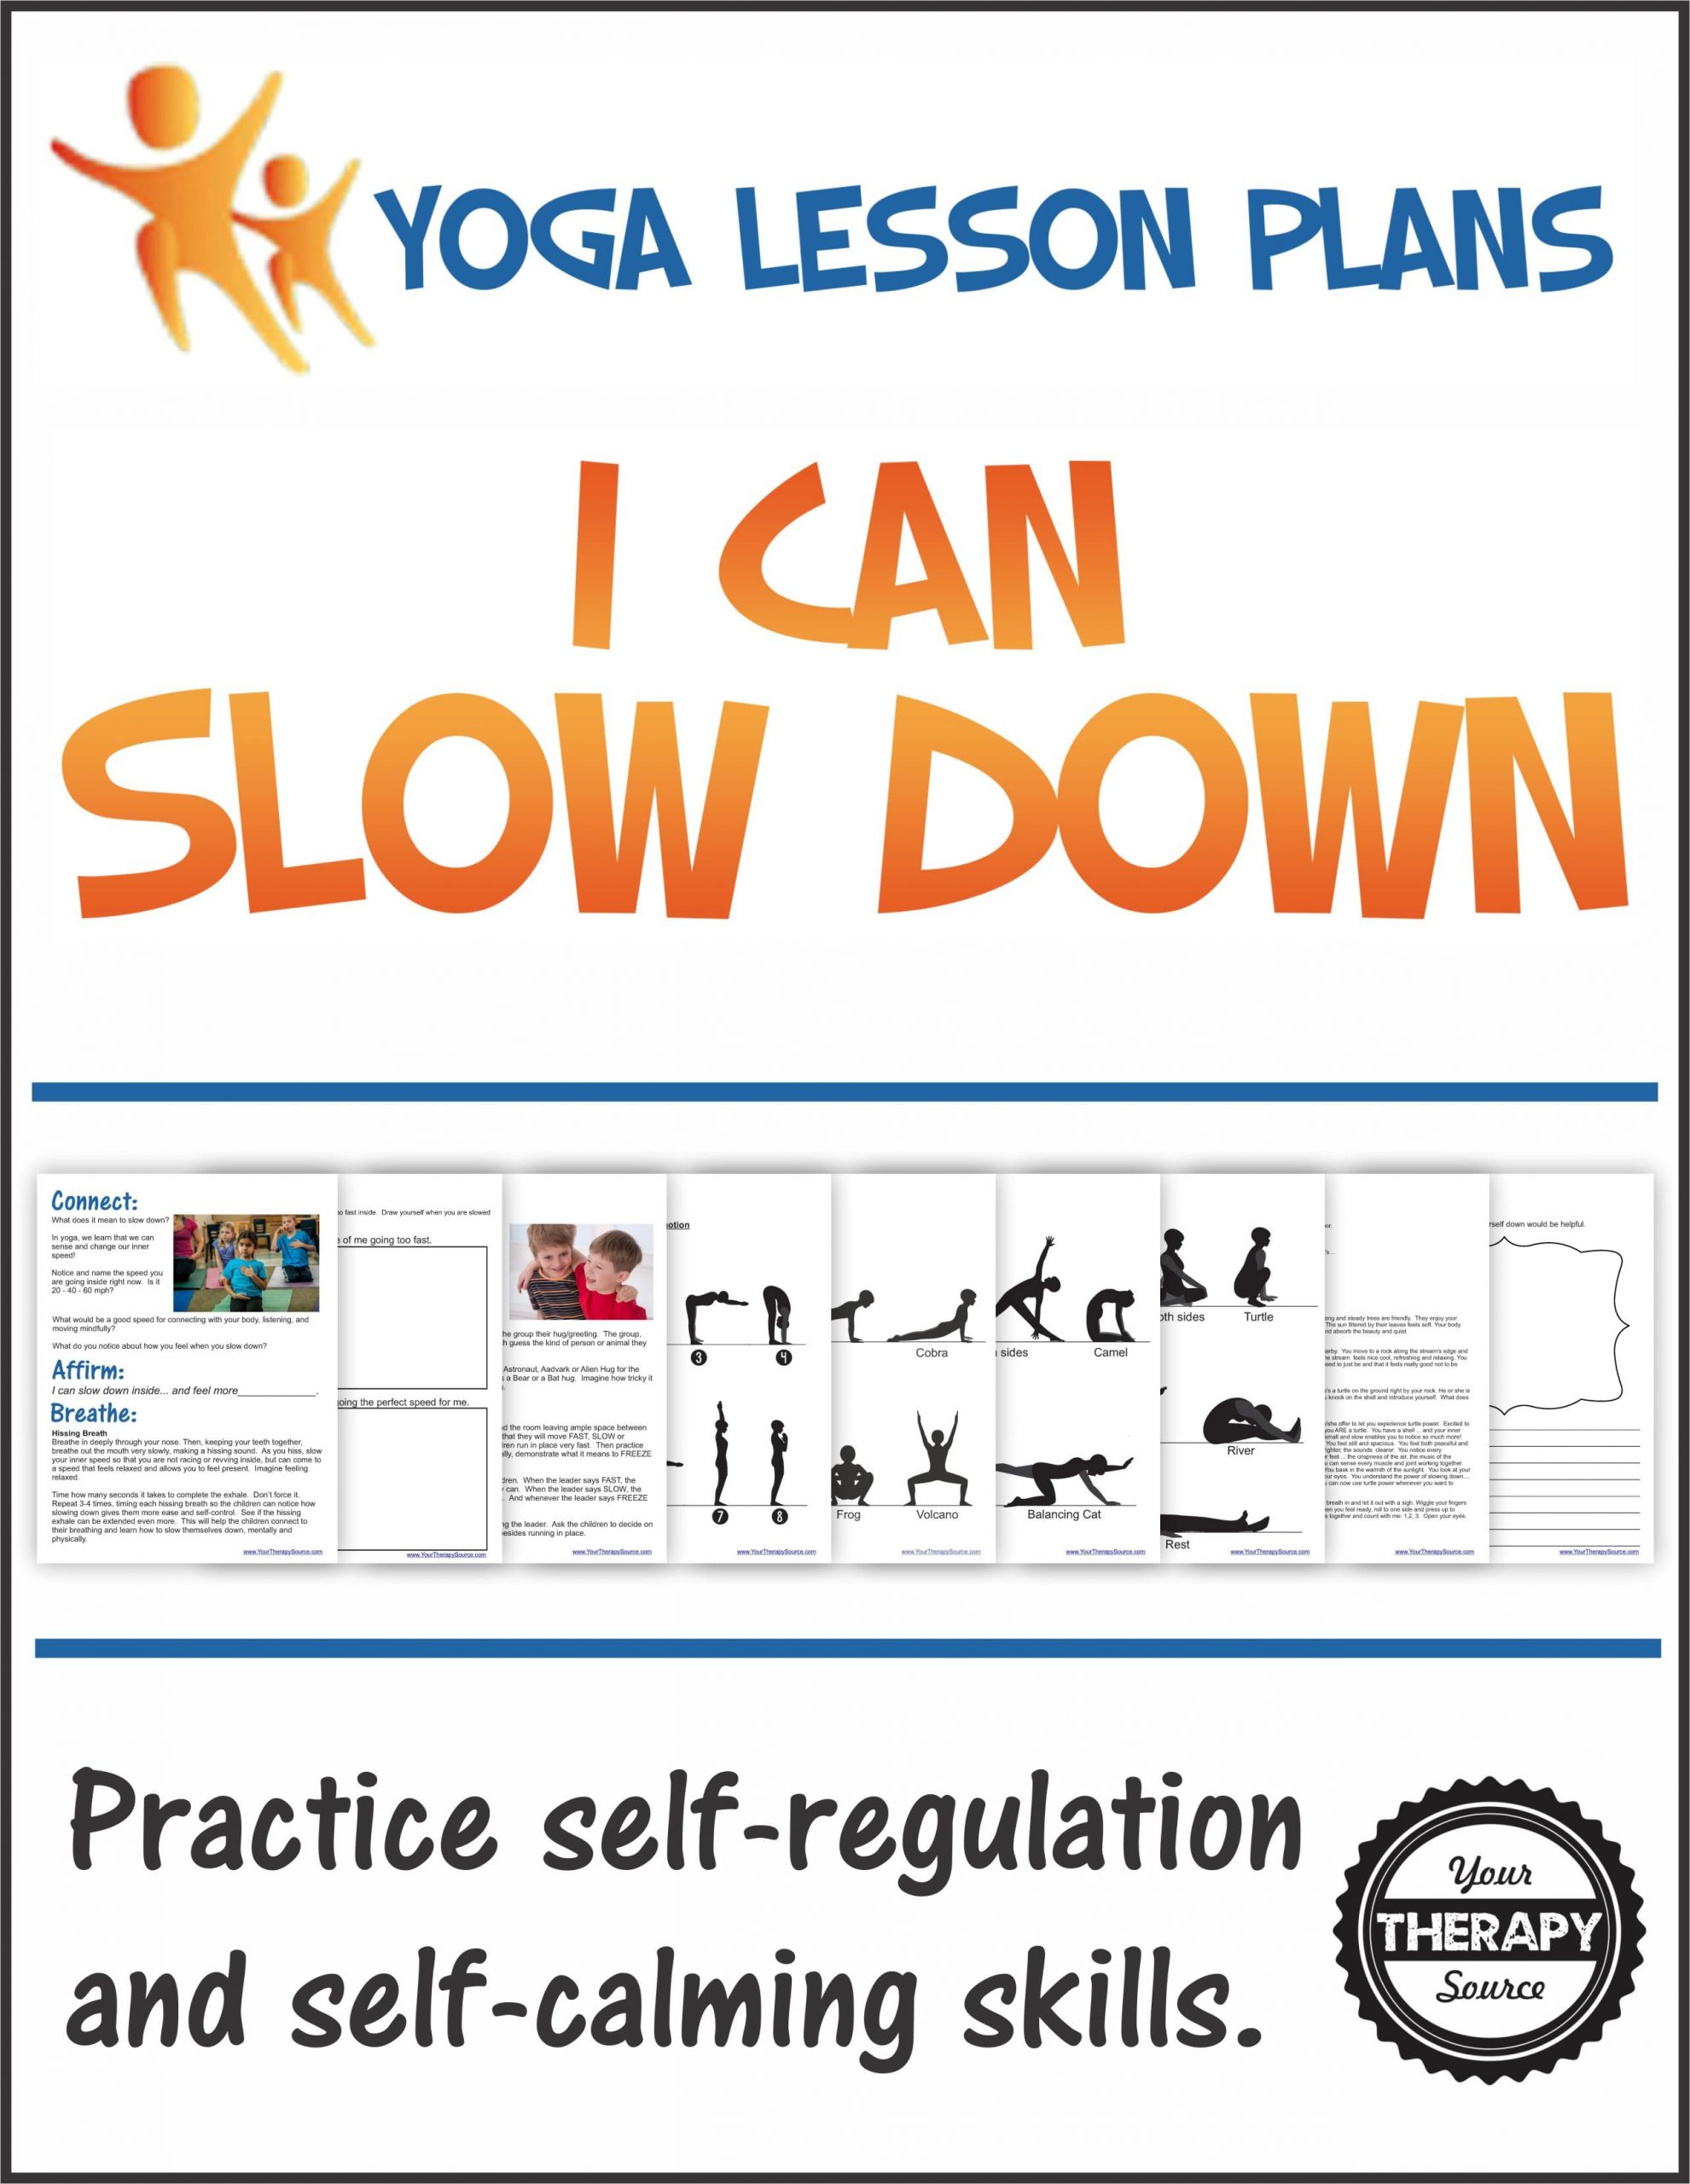 Yoga Lesson Plan - I Can Slow Down